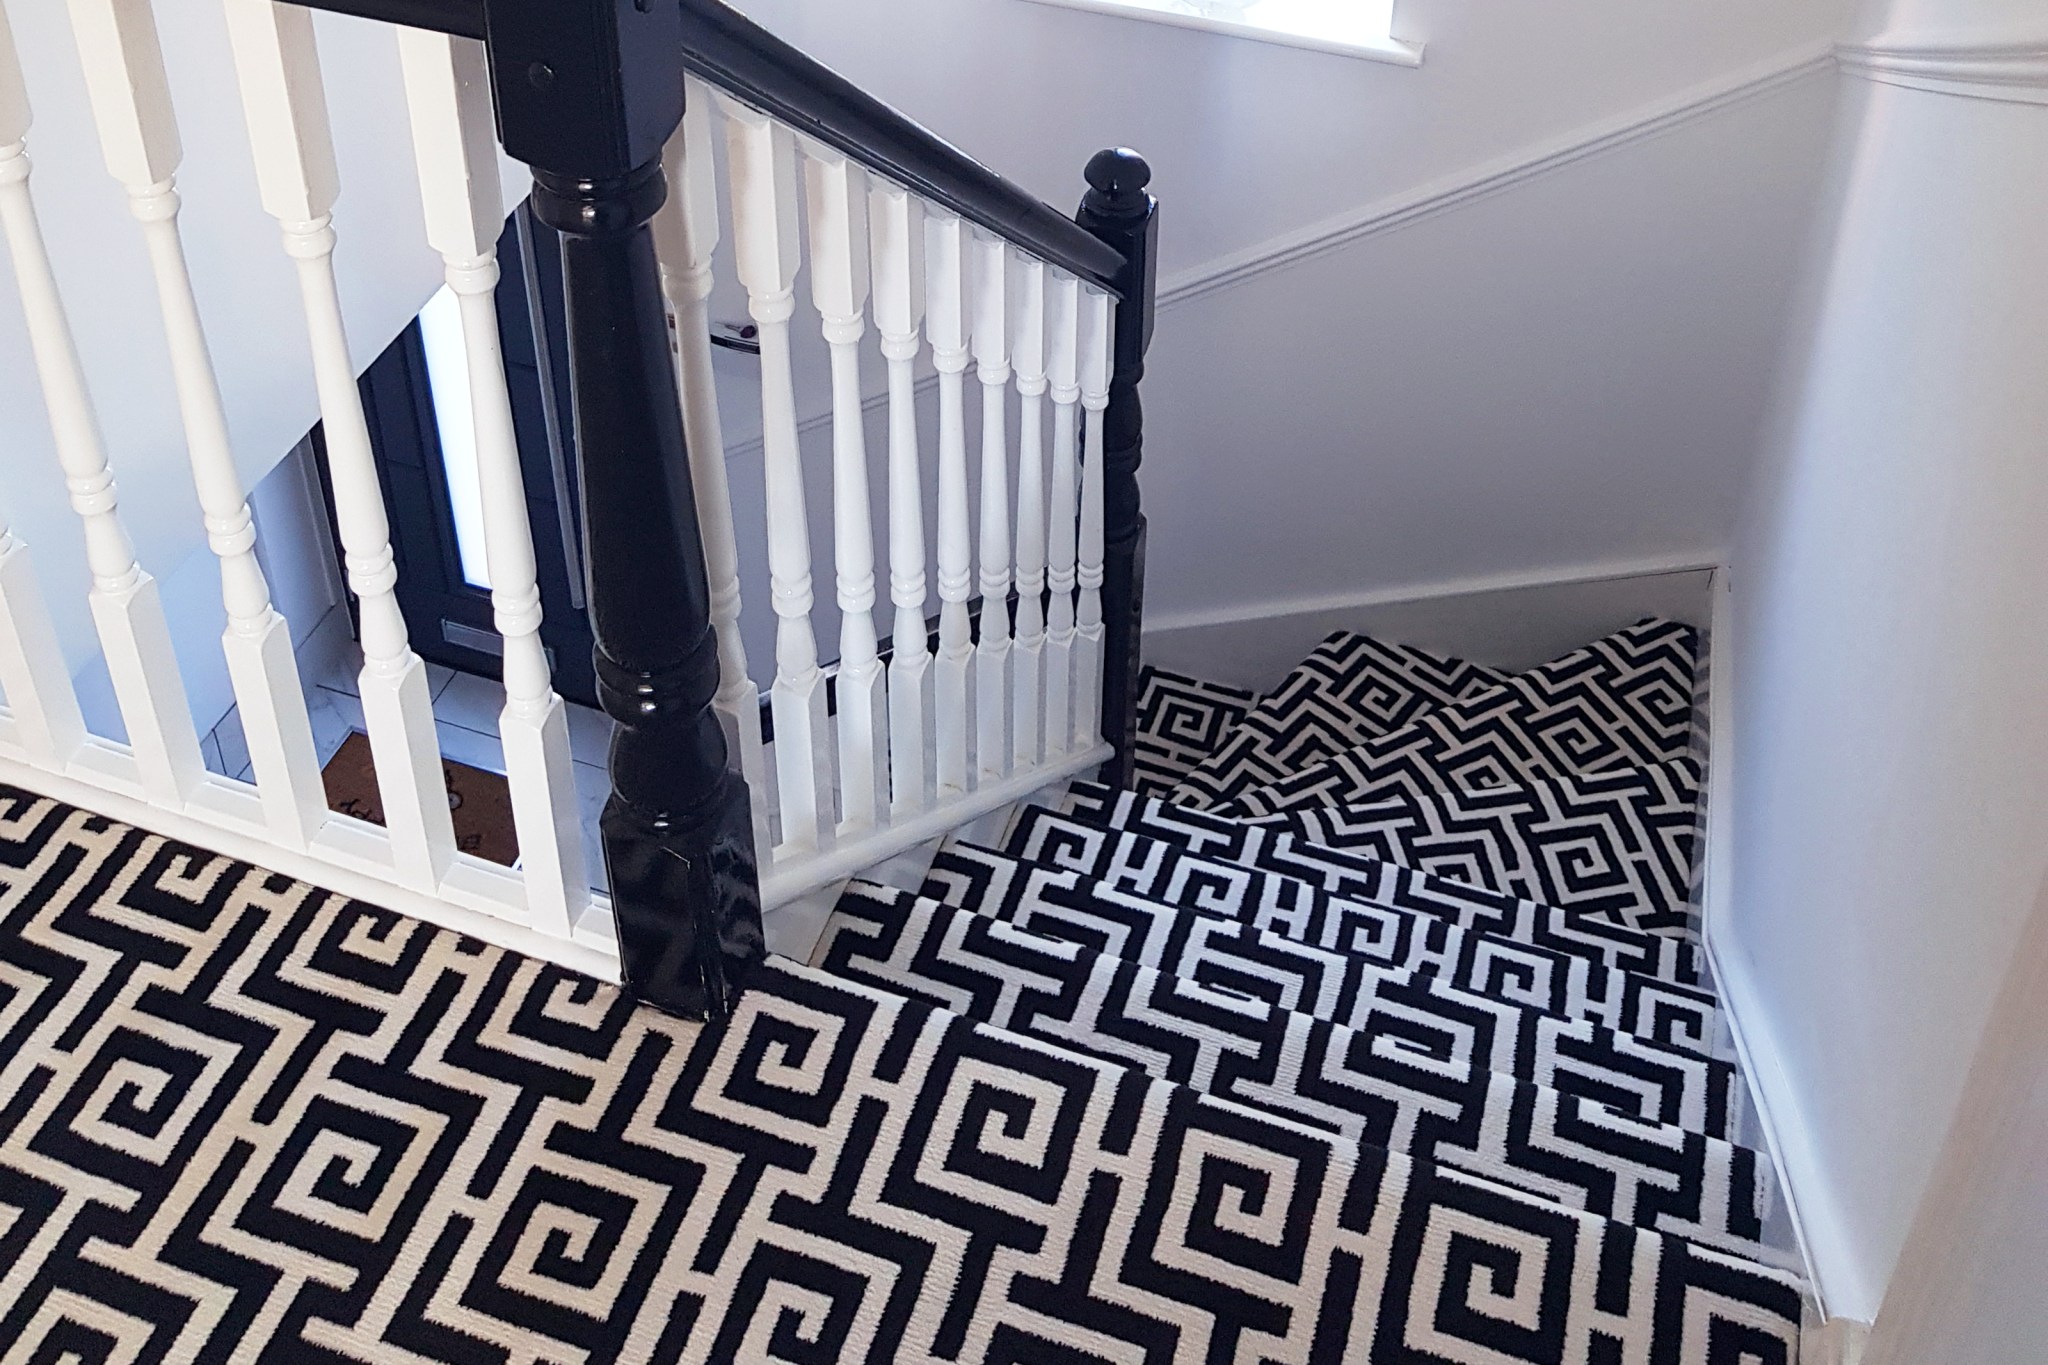 Spiral stairs covered in black and white geometric carpeting